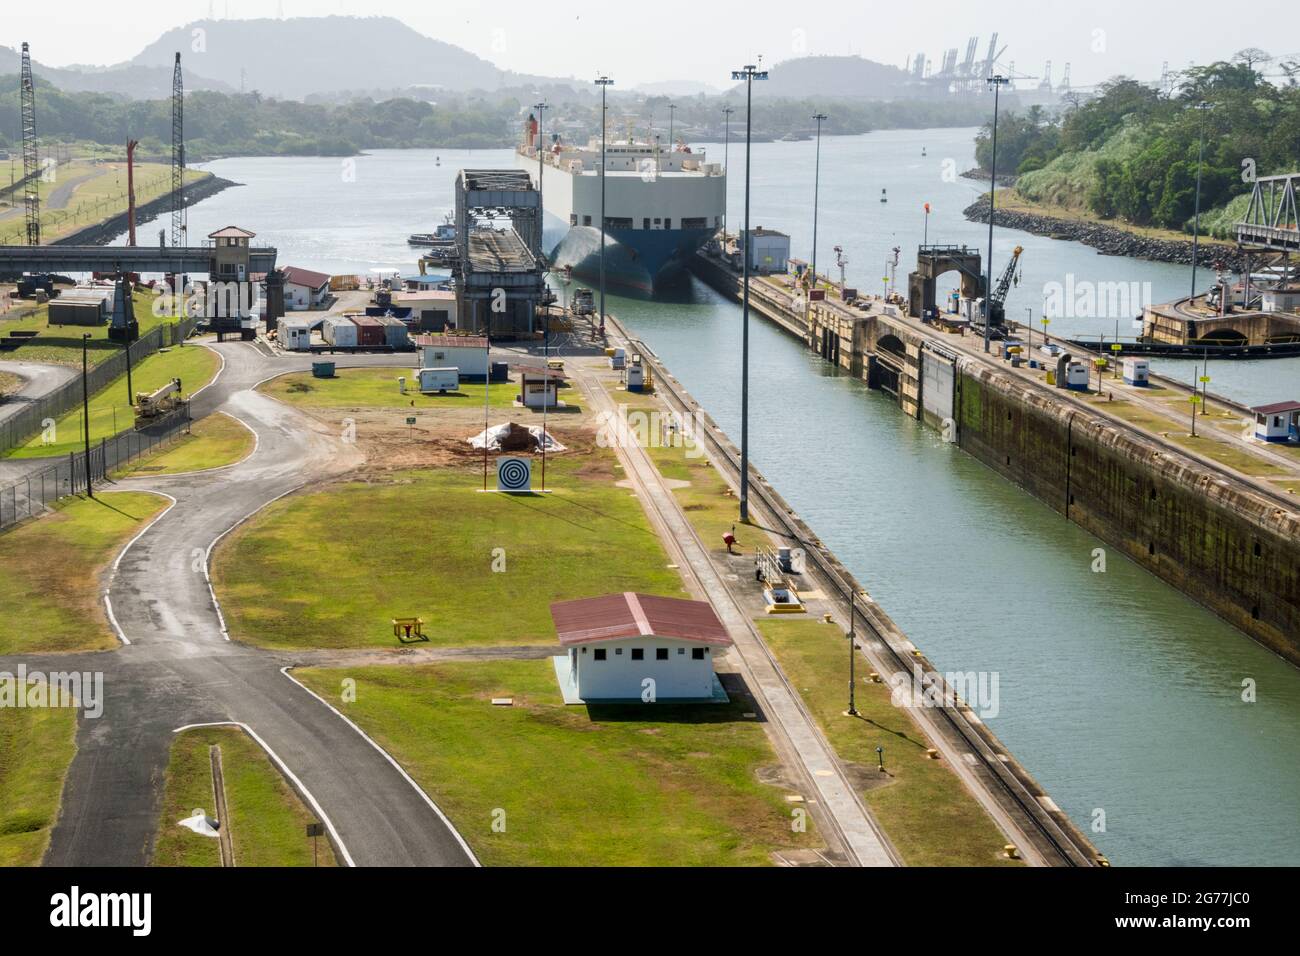 A large cargo just passed through Panama Canal in a sunny day. The main offices and one of the locks can be seen. Stock Photo